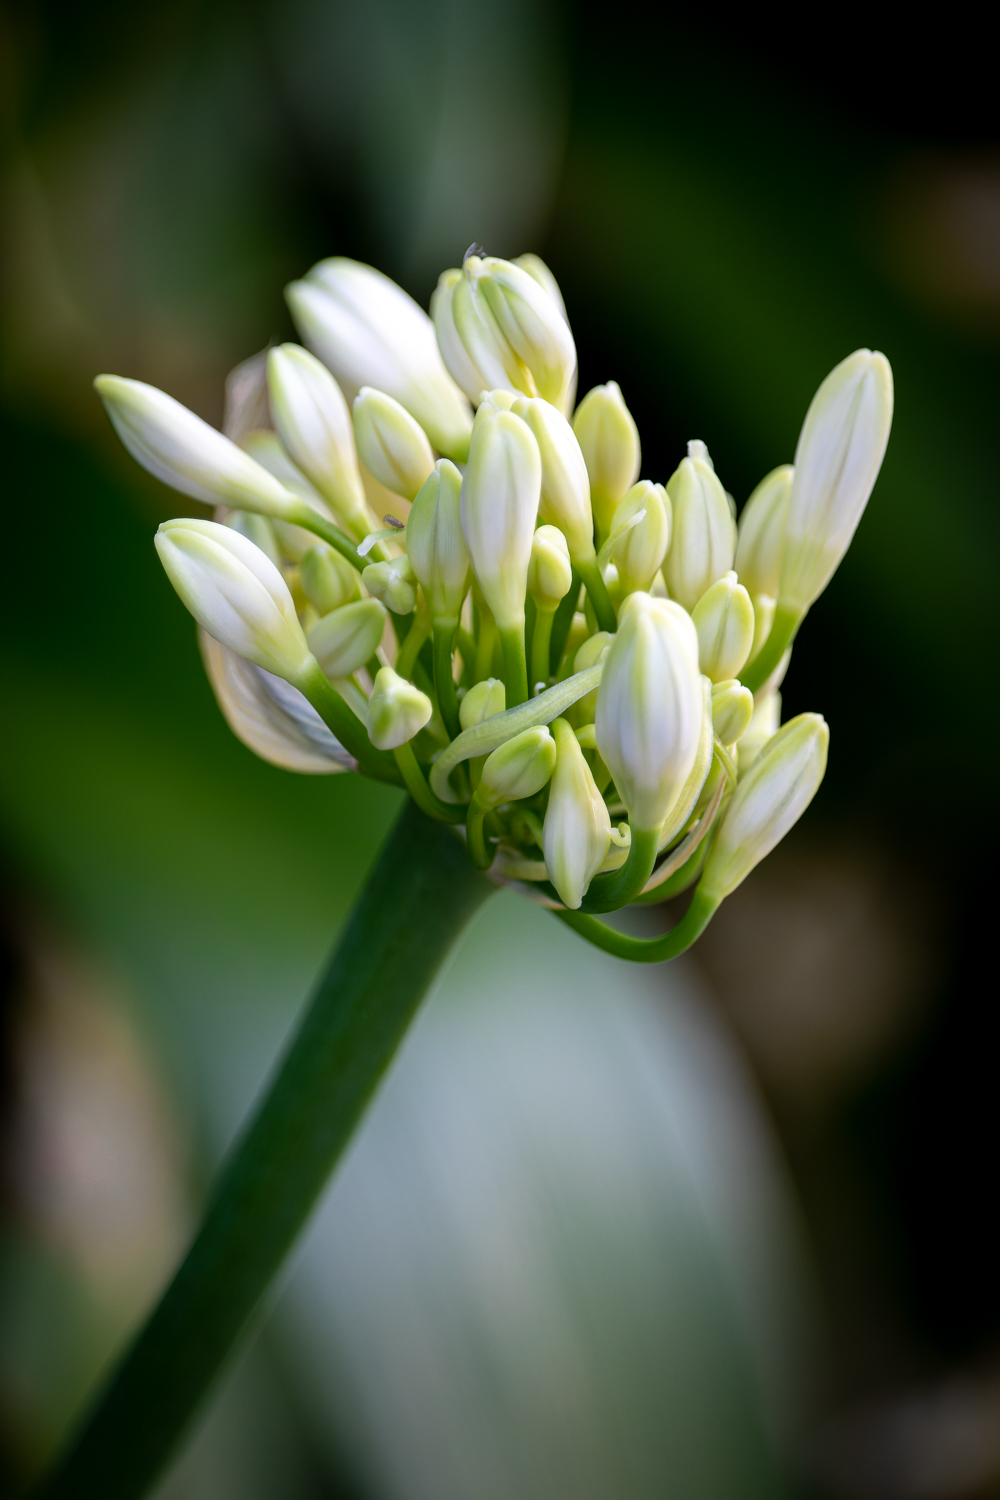 A small white agapanthus flower